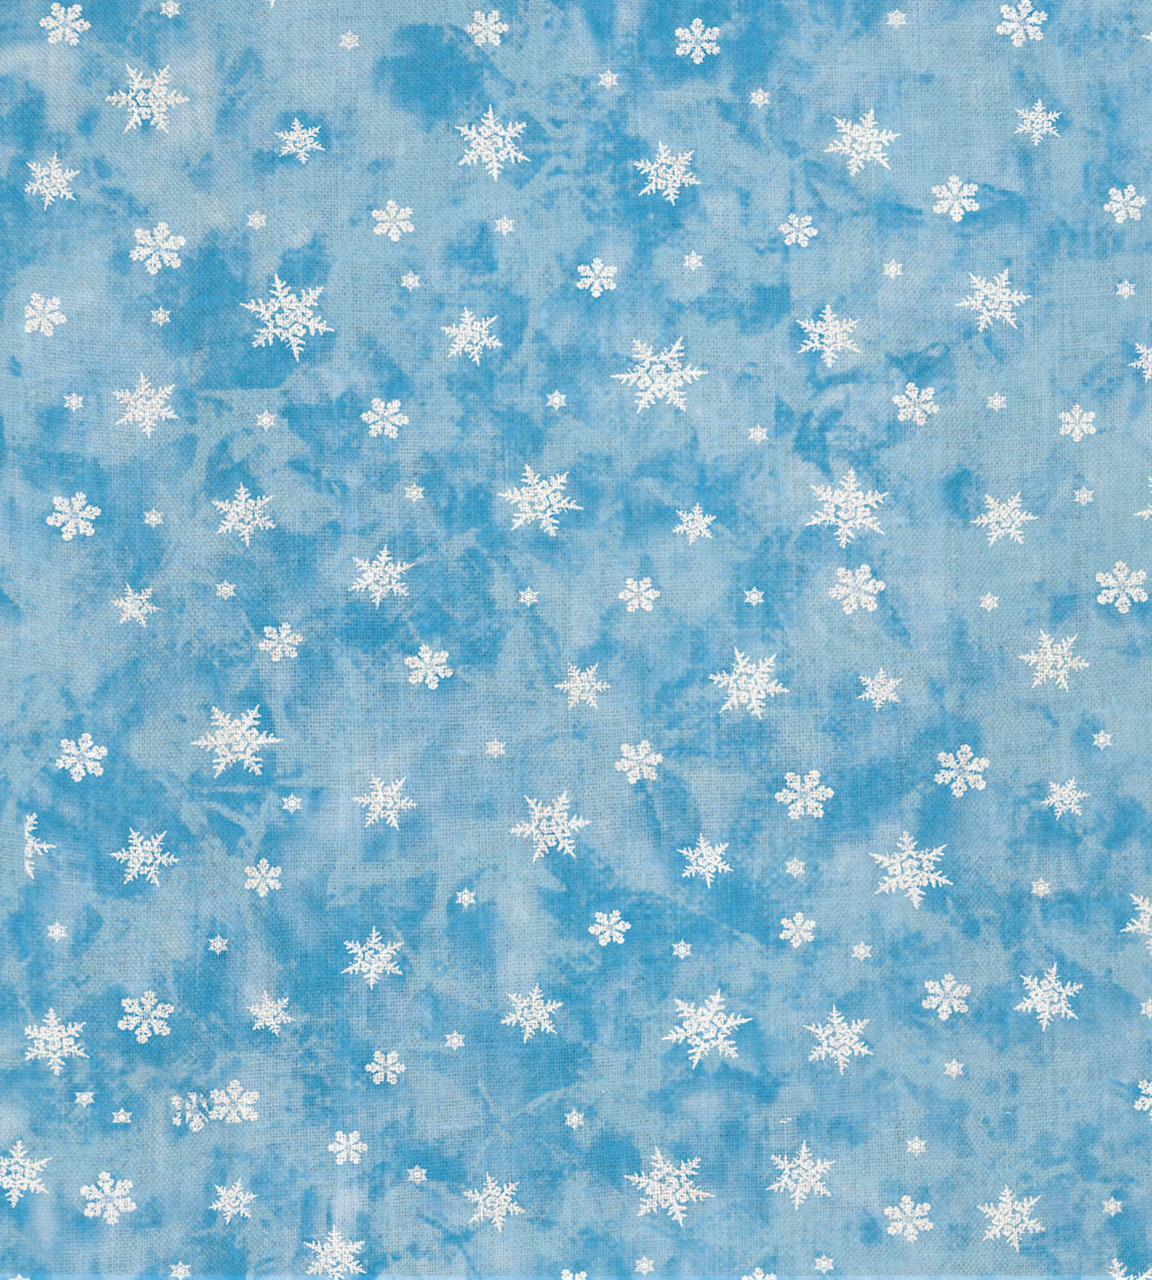 Blue Classic Snowflakes Patterned Cross Stitch Fabric